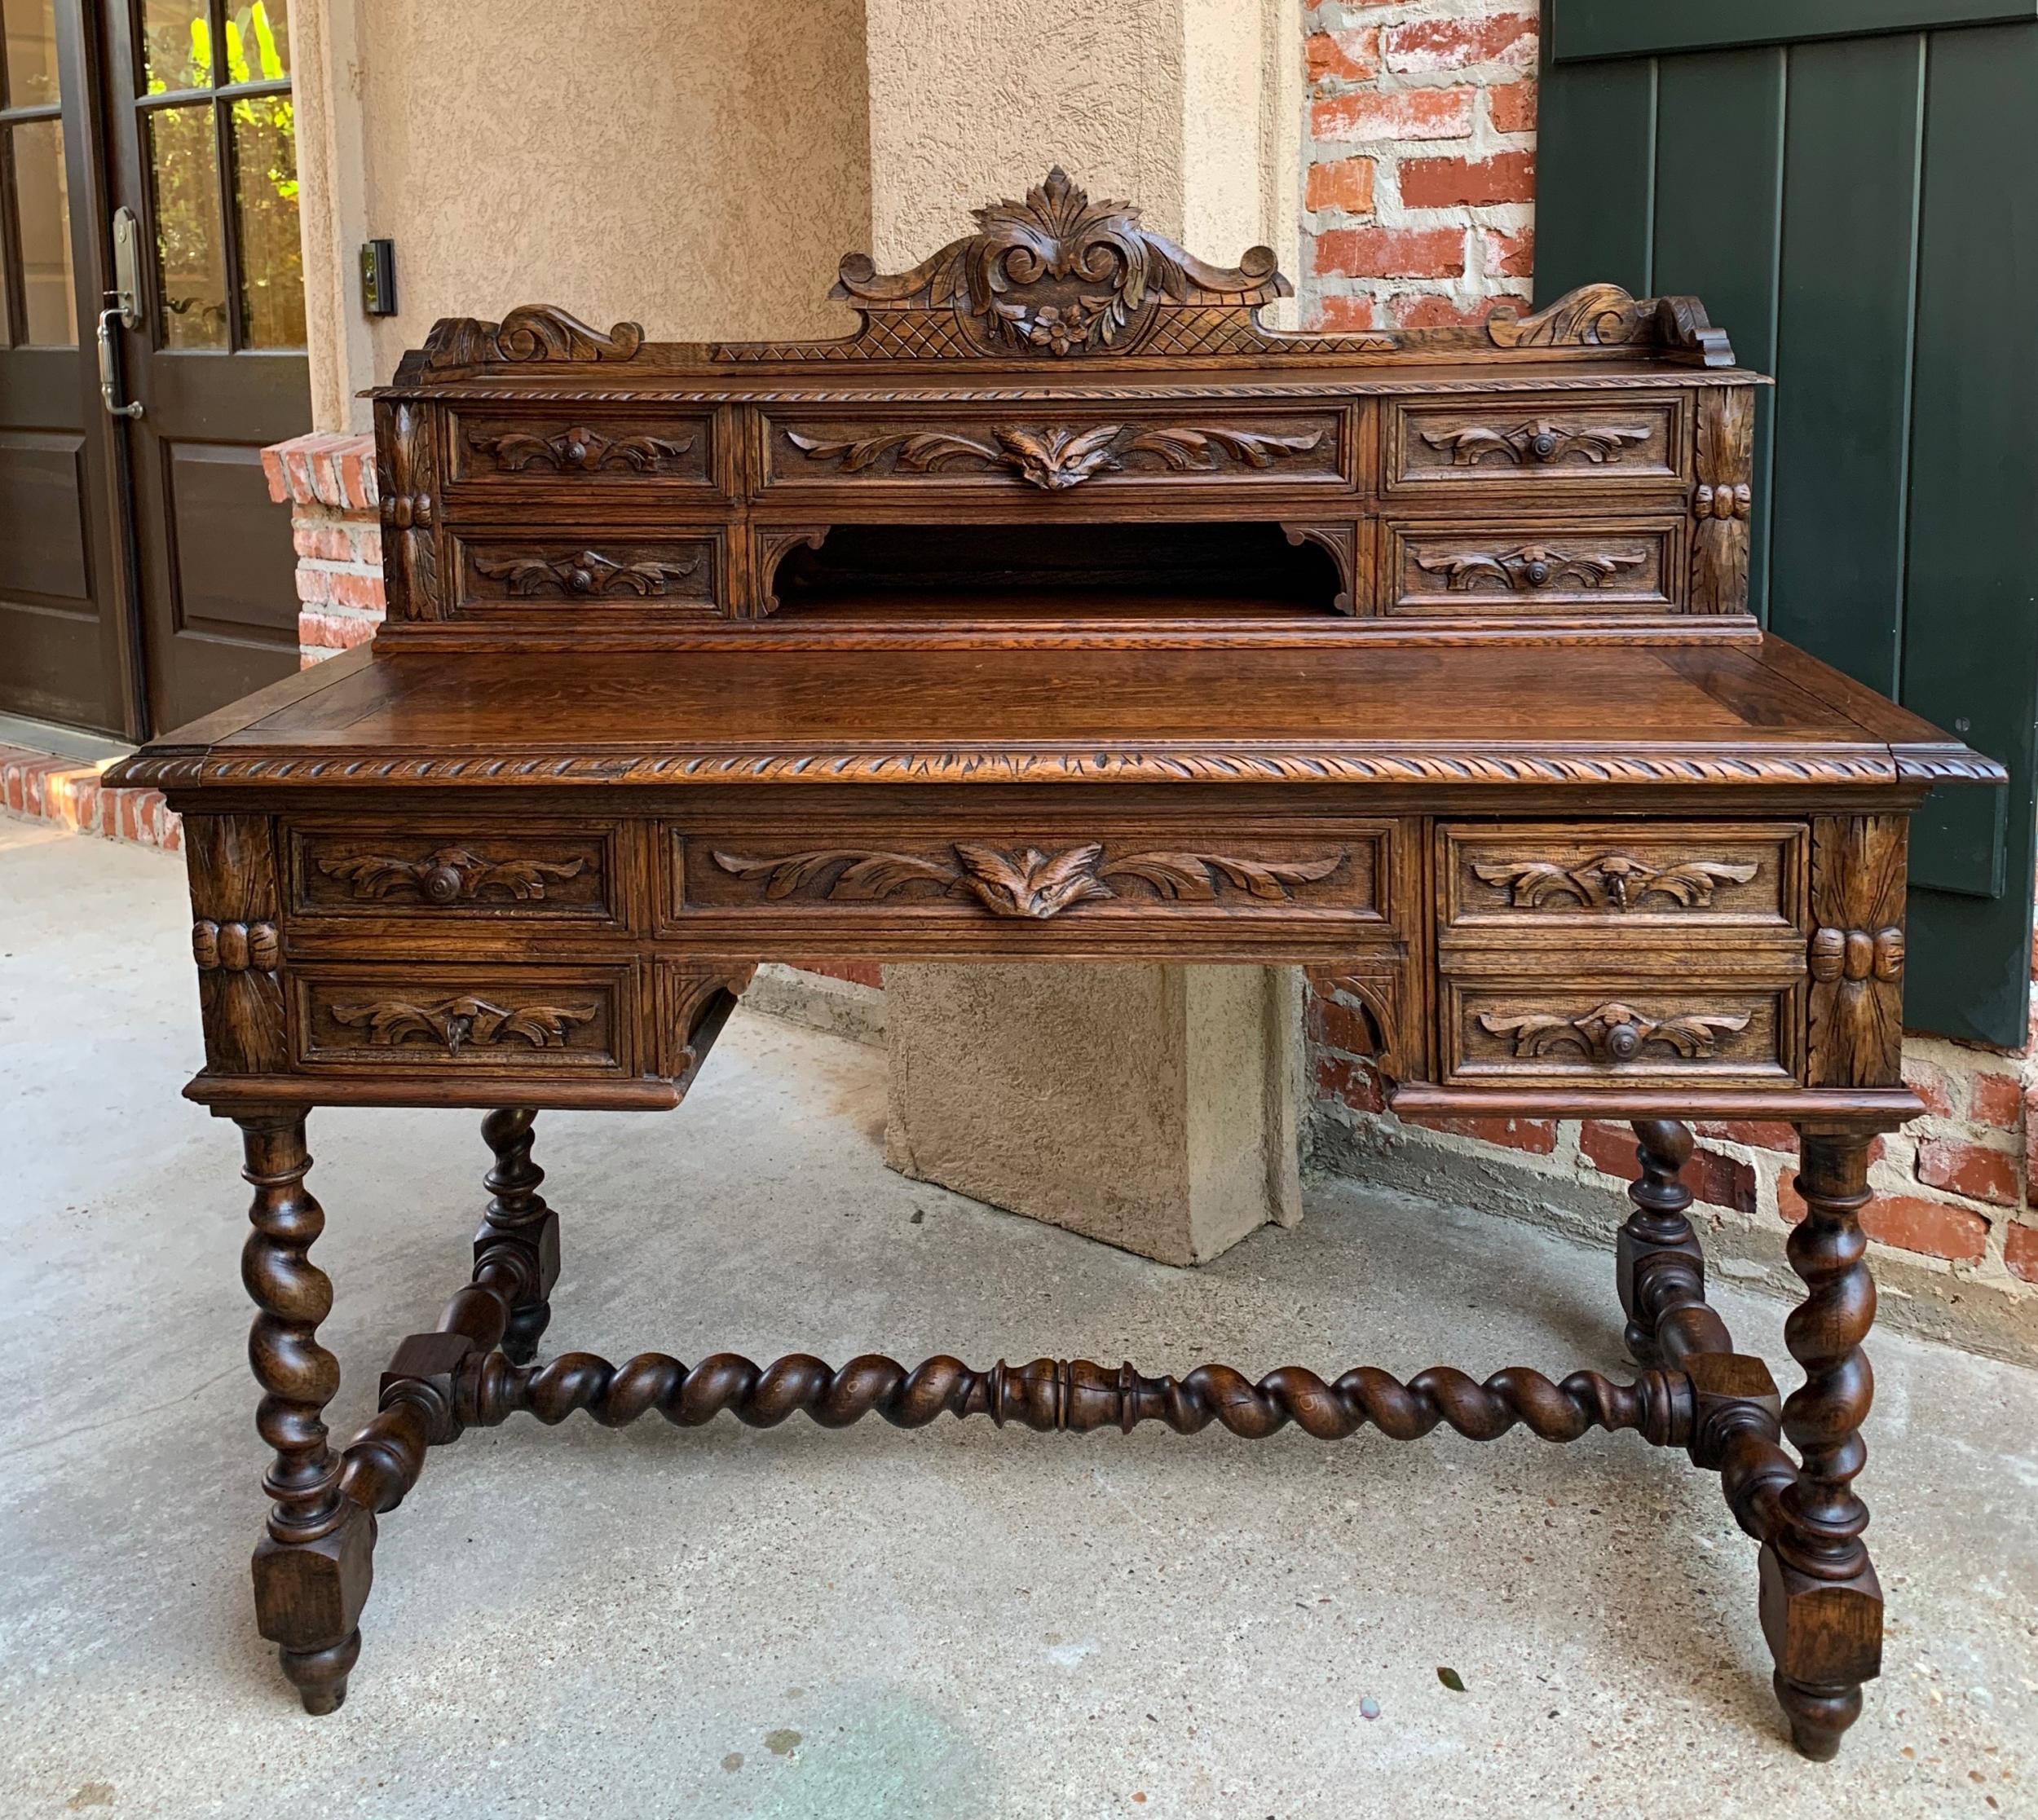 ~Direct from France~
A superb antique French oak desk with exquisite, opulent, ornate carvings!
~The upper desk has a beautiful carved crown with center ribbon/wreath and crosshatch above the full length display shelf. Below are five drawers and a